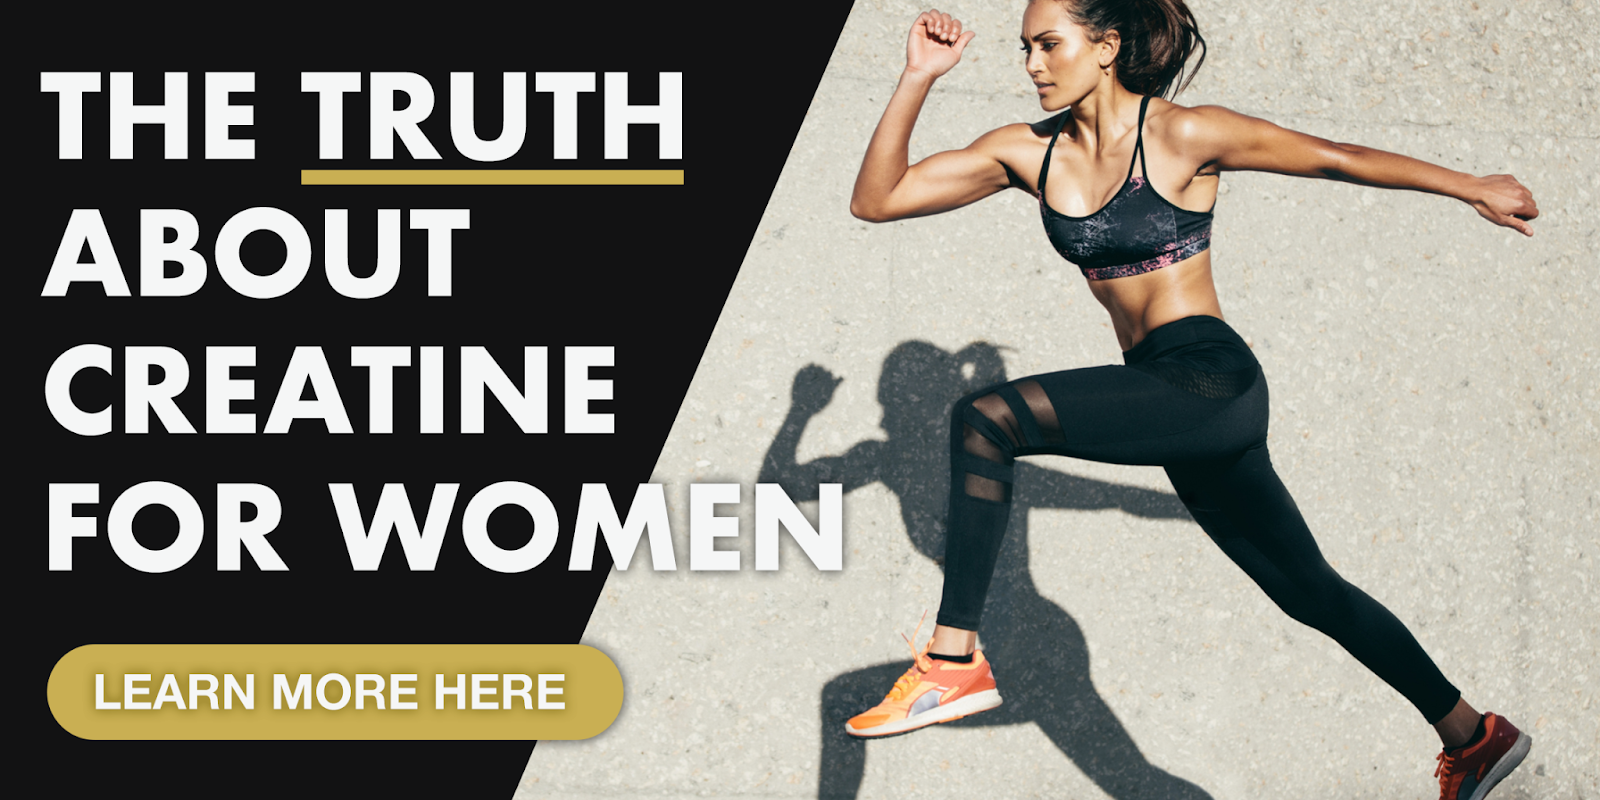 The Truth About Creatine For Women